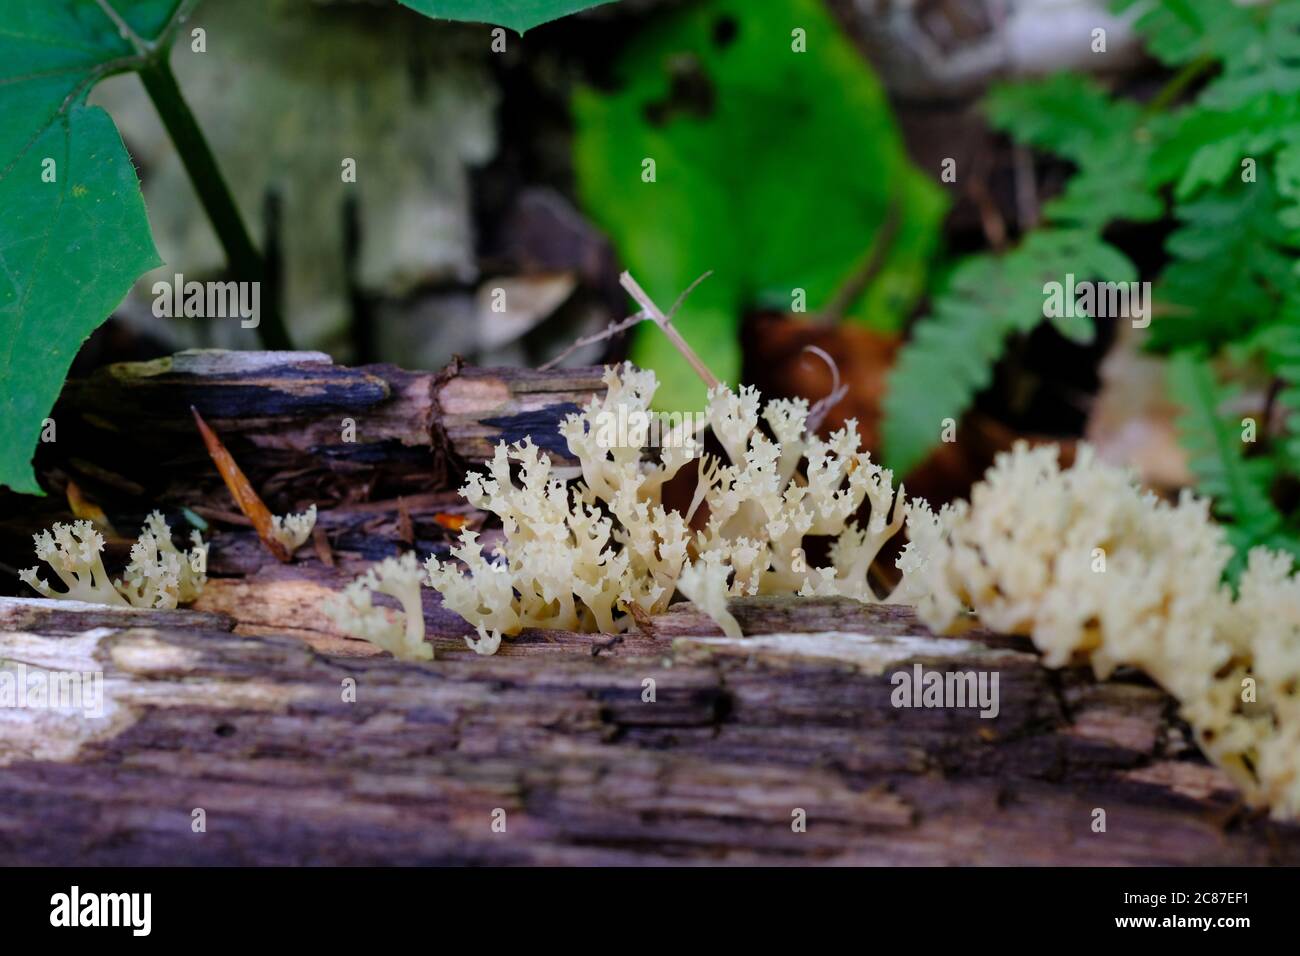 Pale and spiky coral fungus on a rotting log in Gatineau Park, Quebec, Canada. Stock Photo